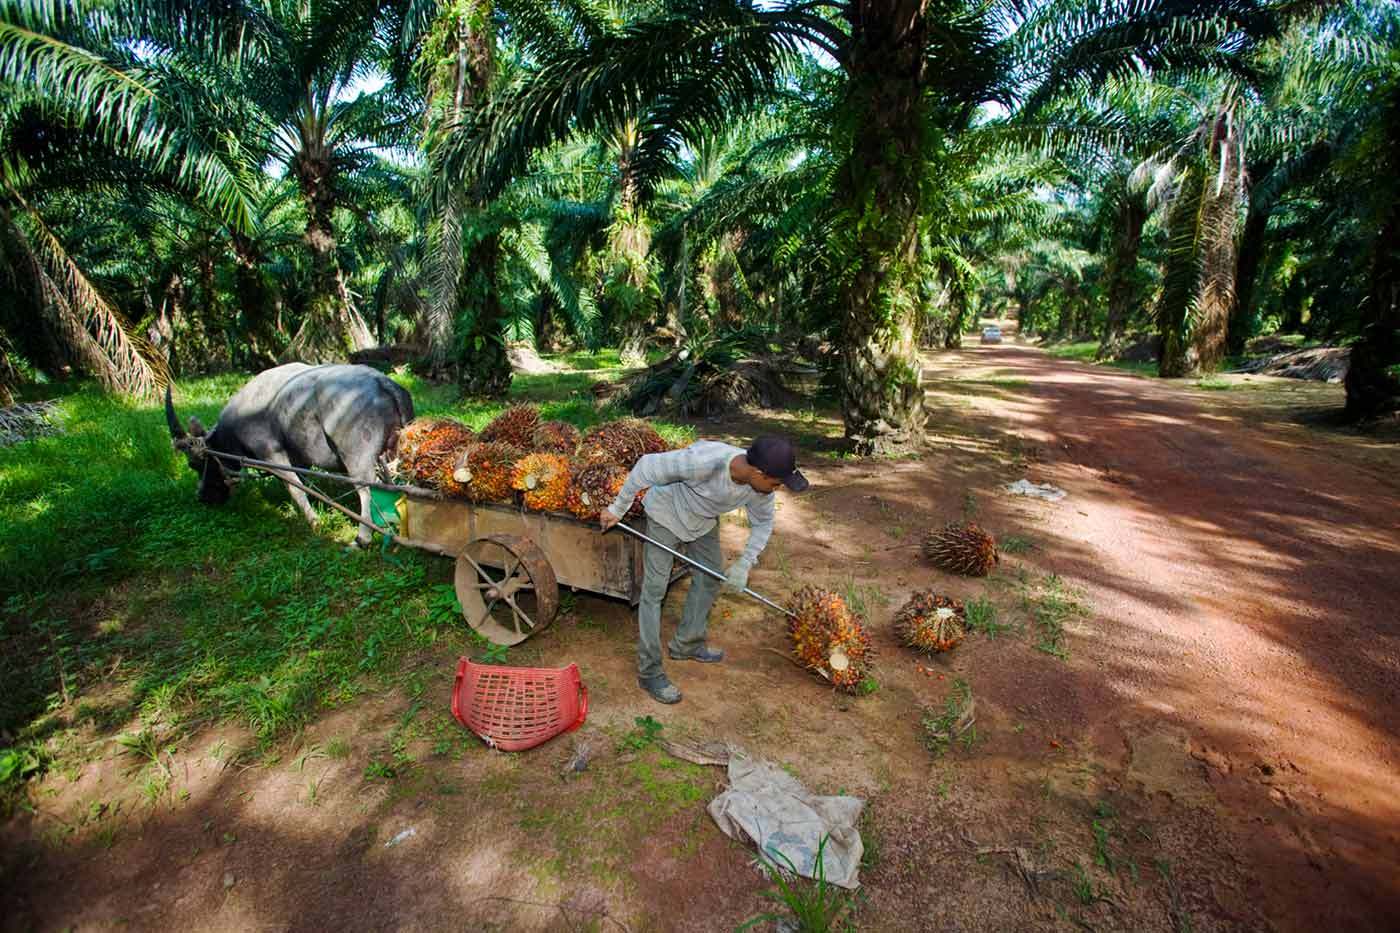 Harvesting palm oil fruit with
buffalo, environmentally responsible and economically brilliant : BUSINESS & INDUSTRY : Viviane Moos |  Documentary Photographer